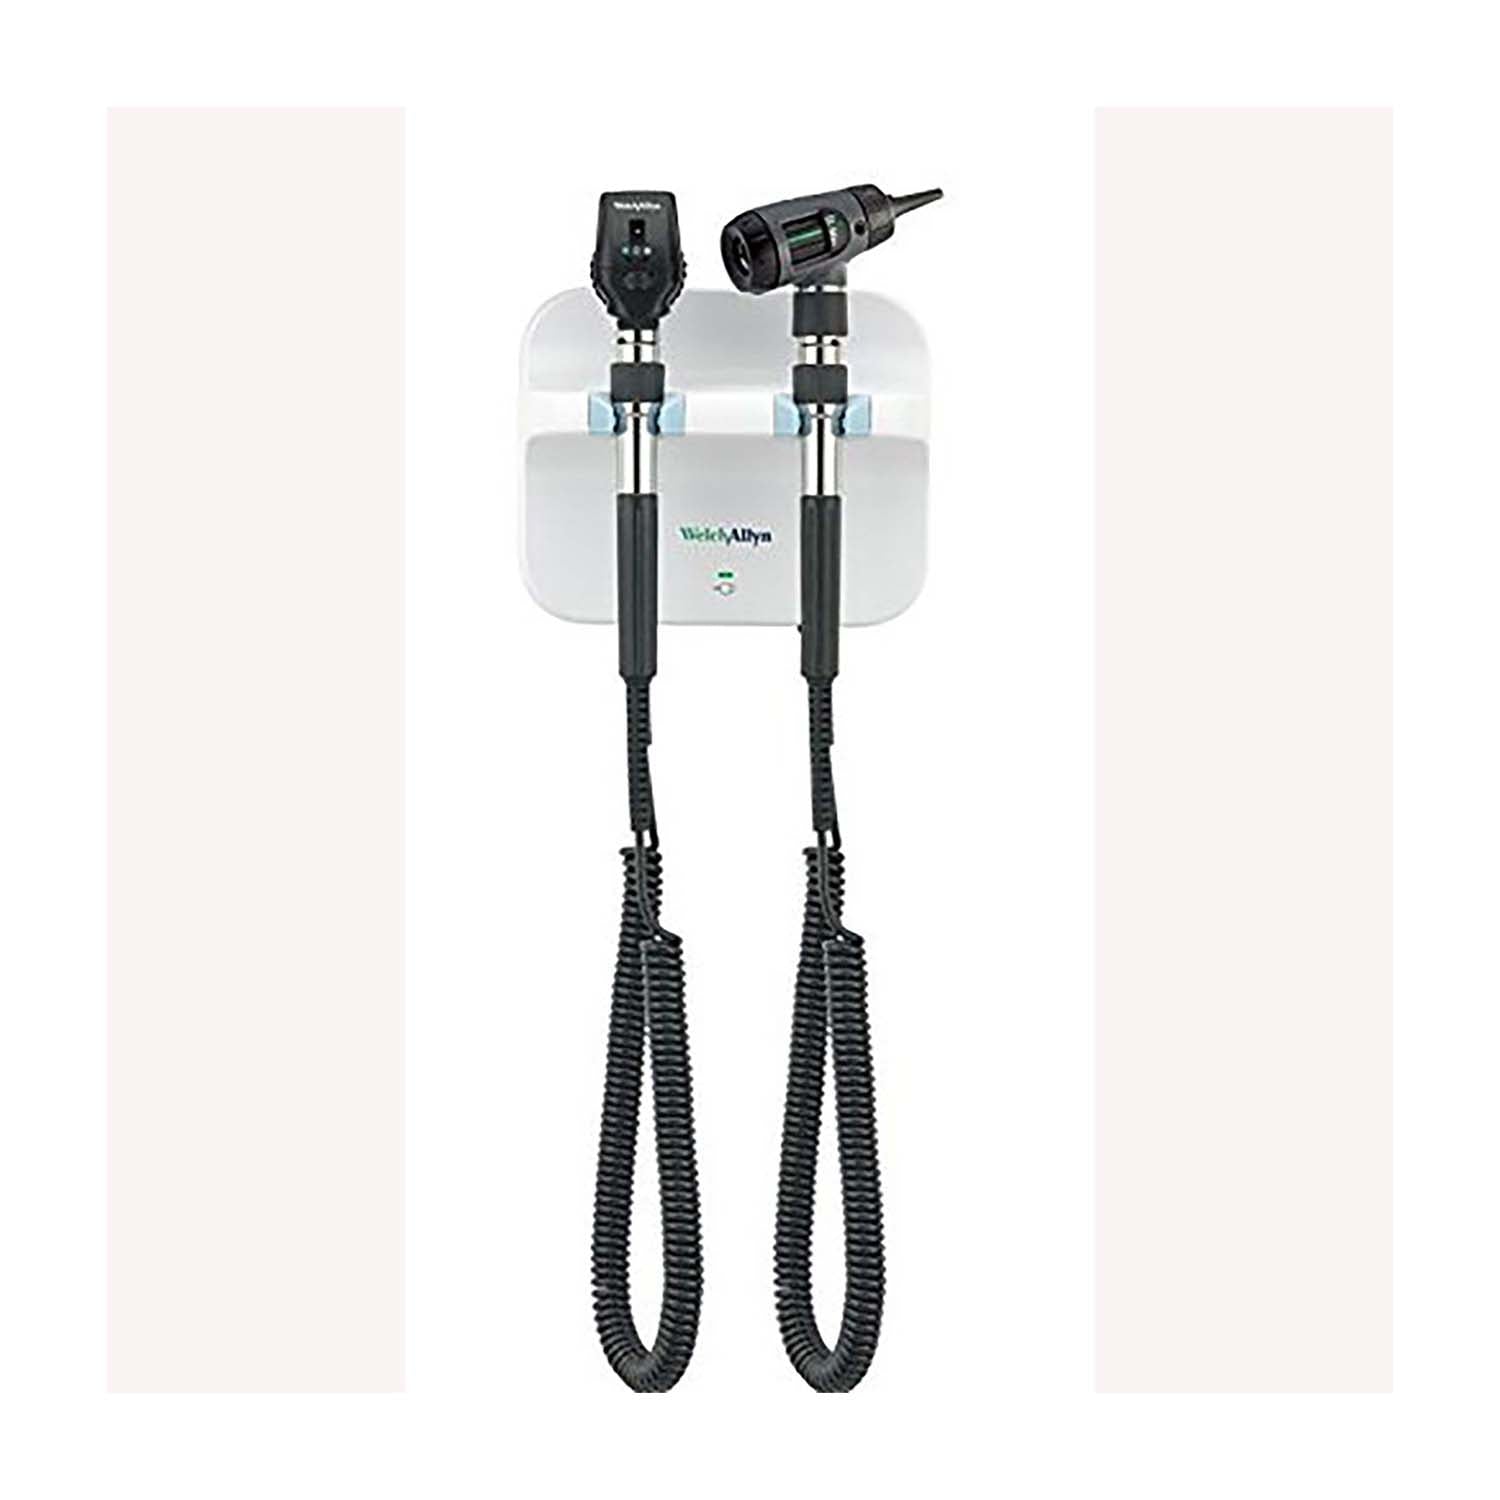 Welch Allyn Green Series 777 Integrated Wall System - LED Coaxial Oph & Diagnostic Otoscope